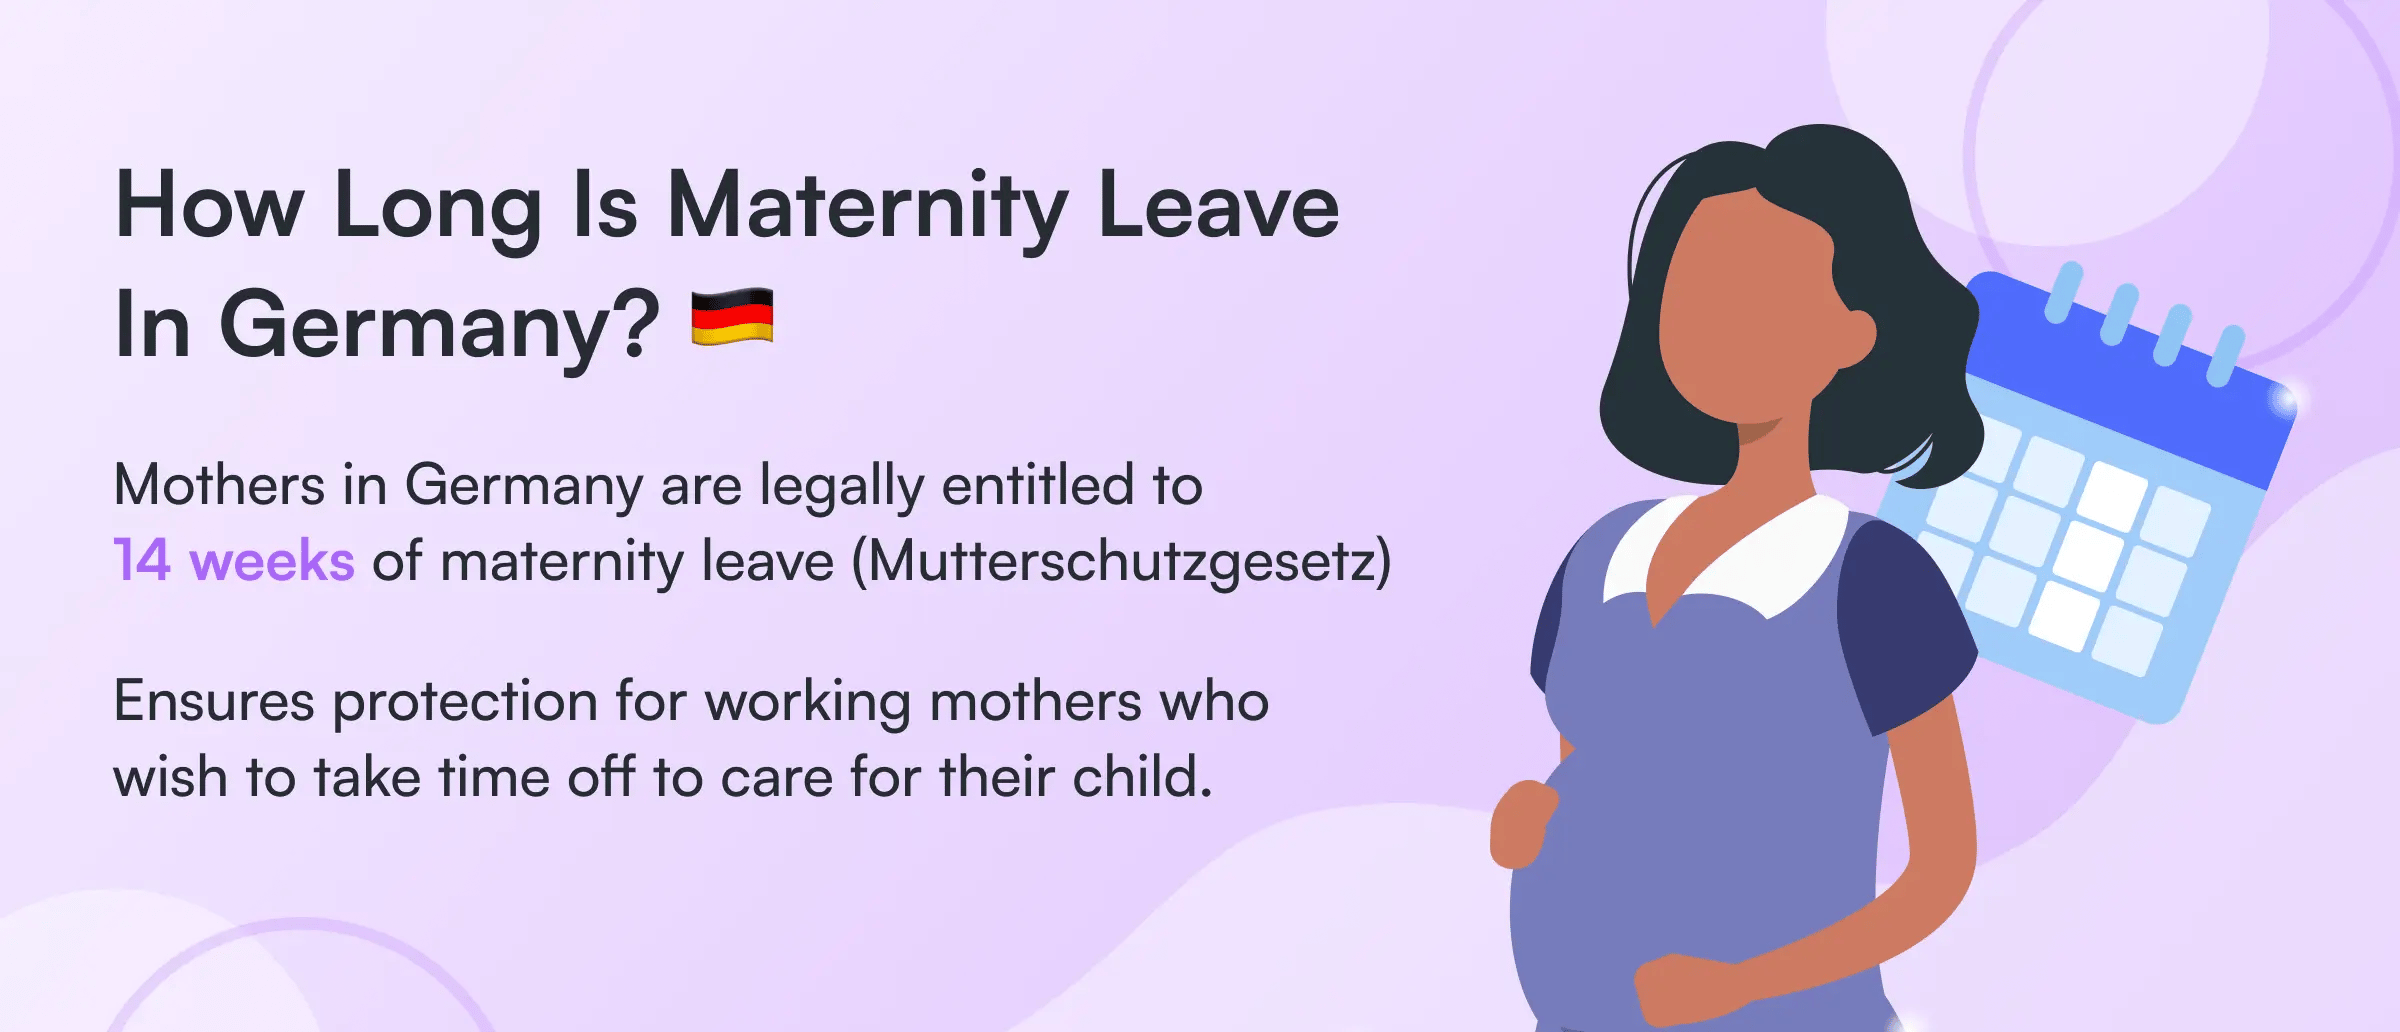 How Long Is Maternity Leave In Germany